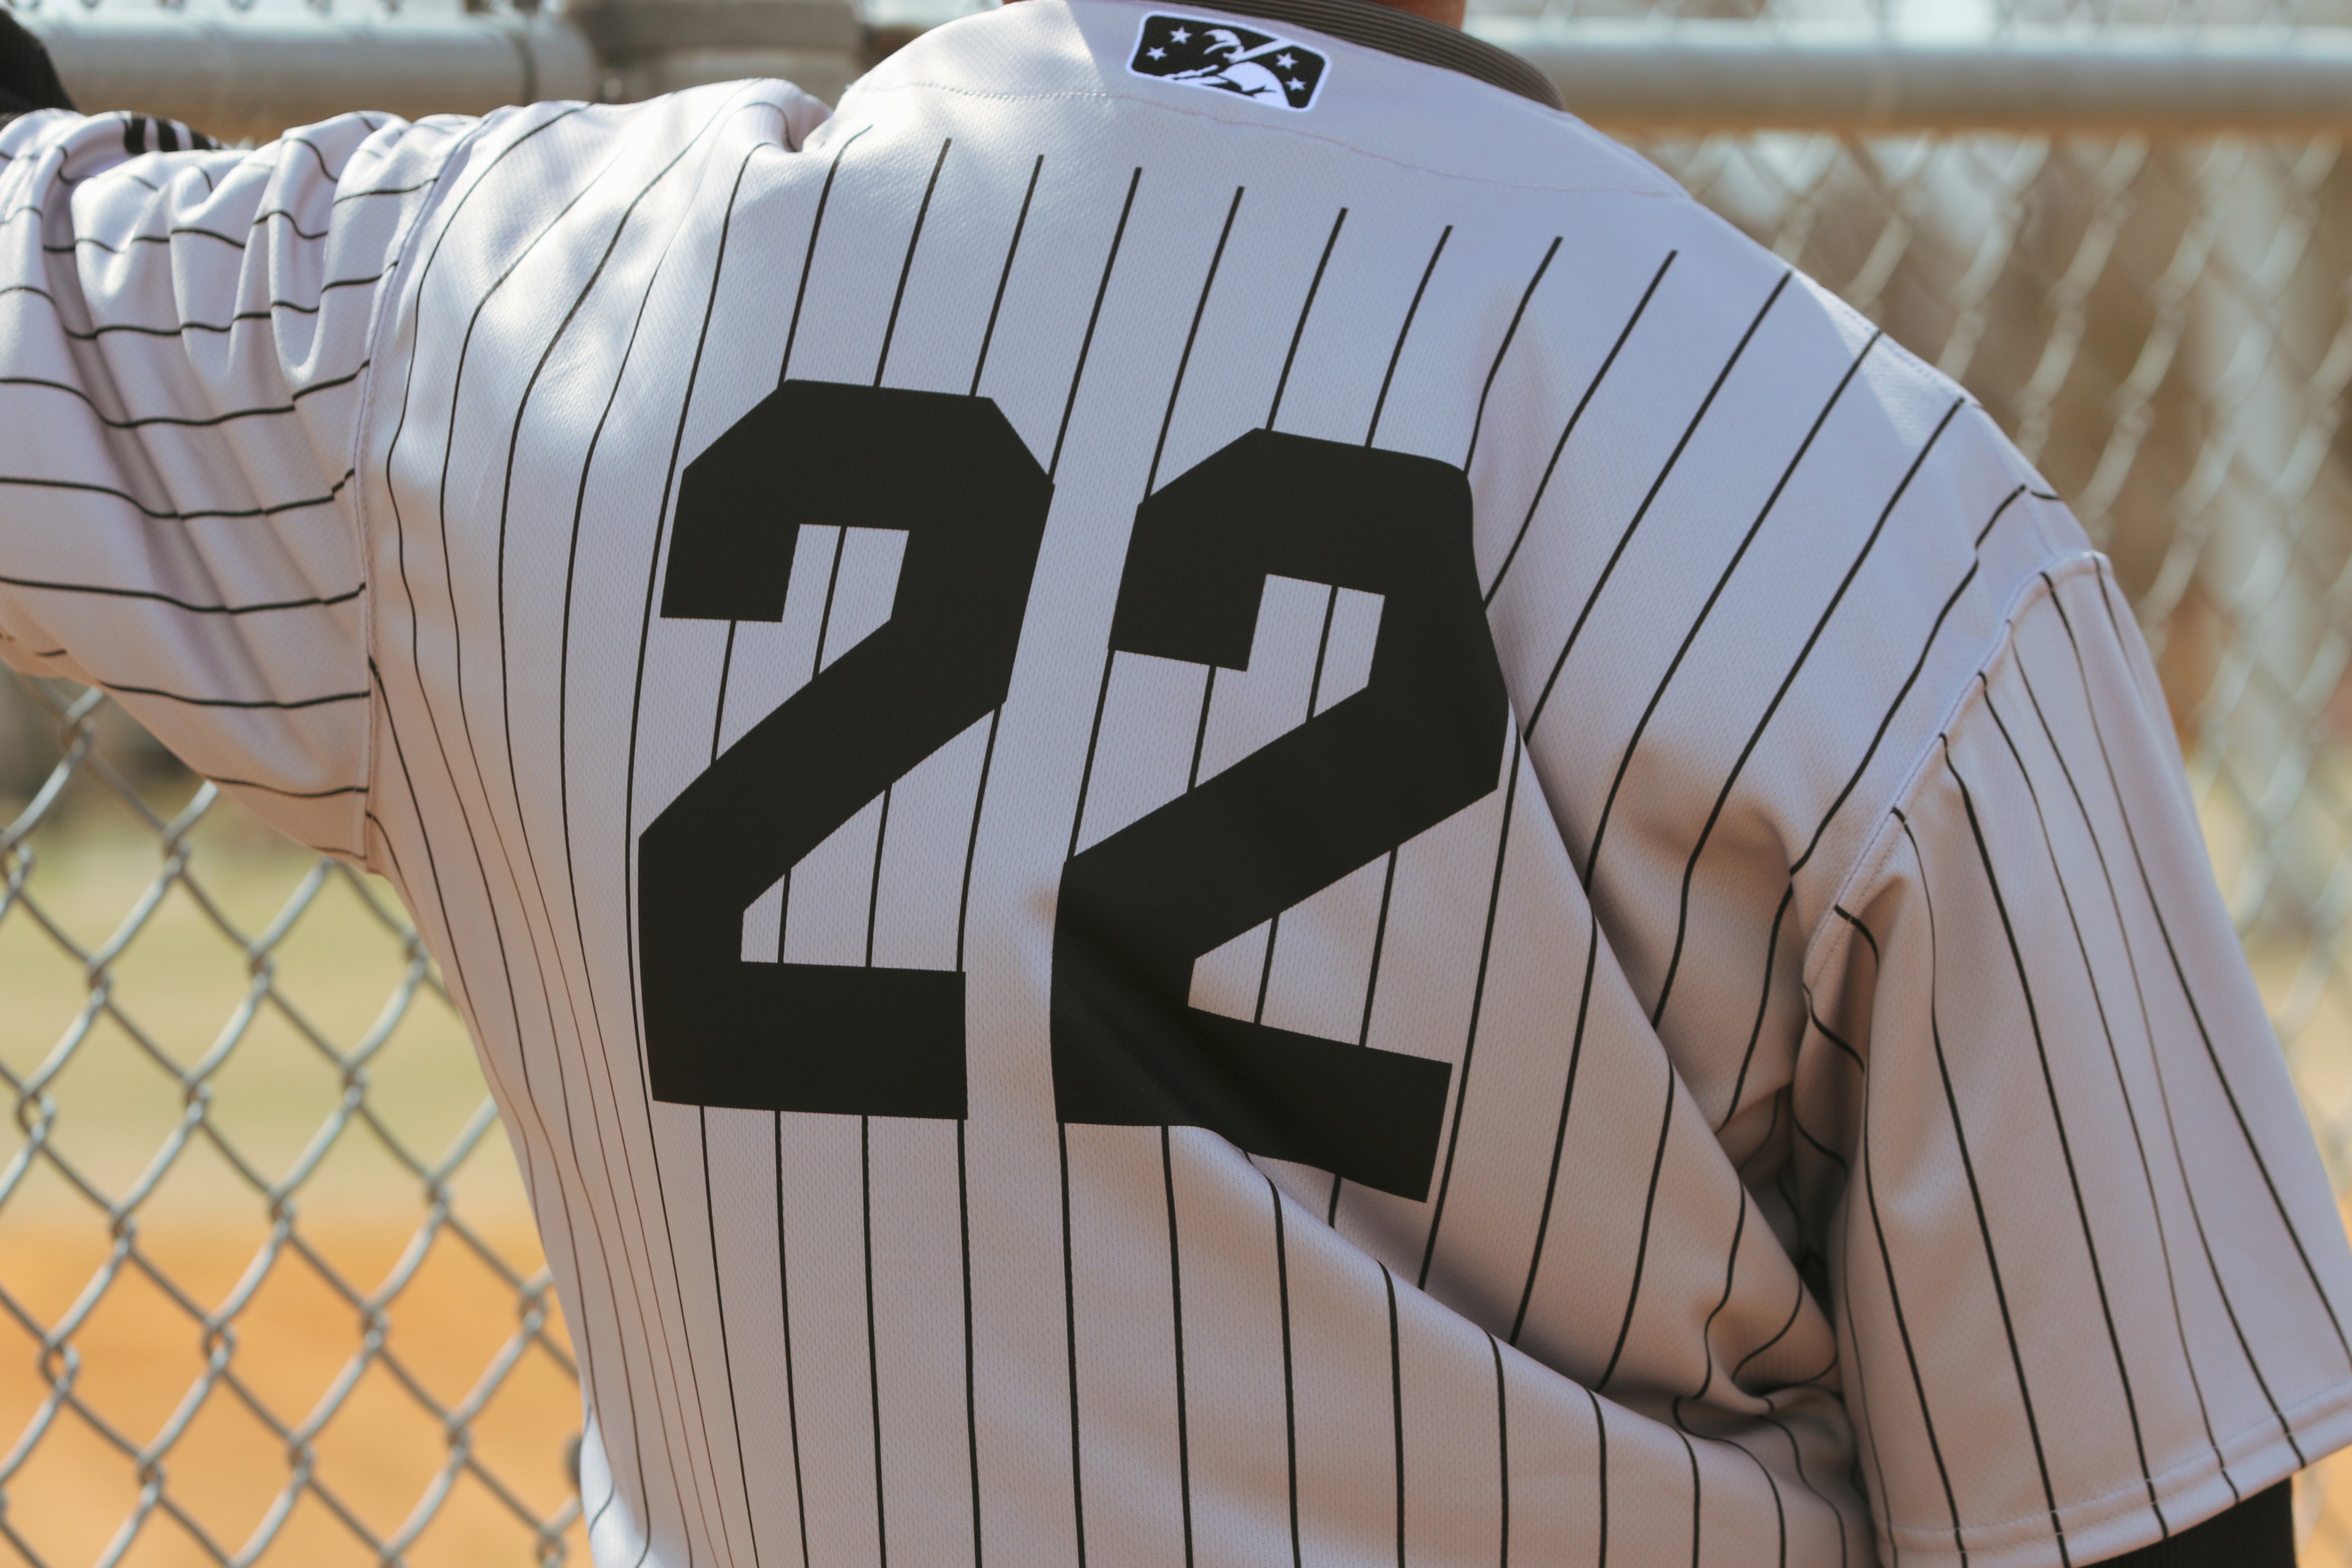 Black Giants Youth Jersey – Frisco RoughRiders